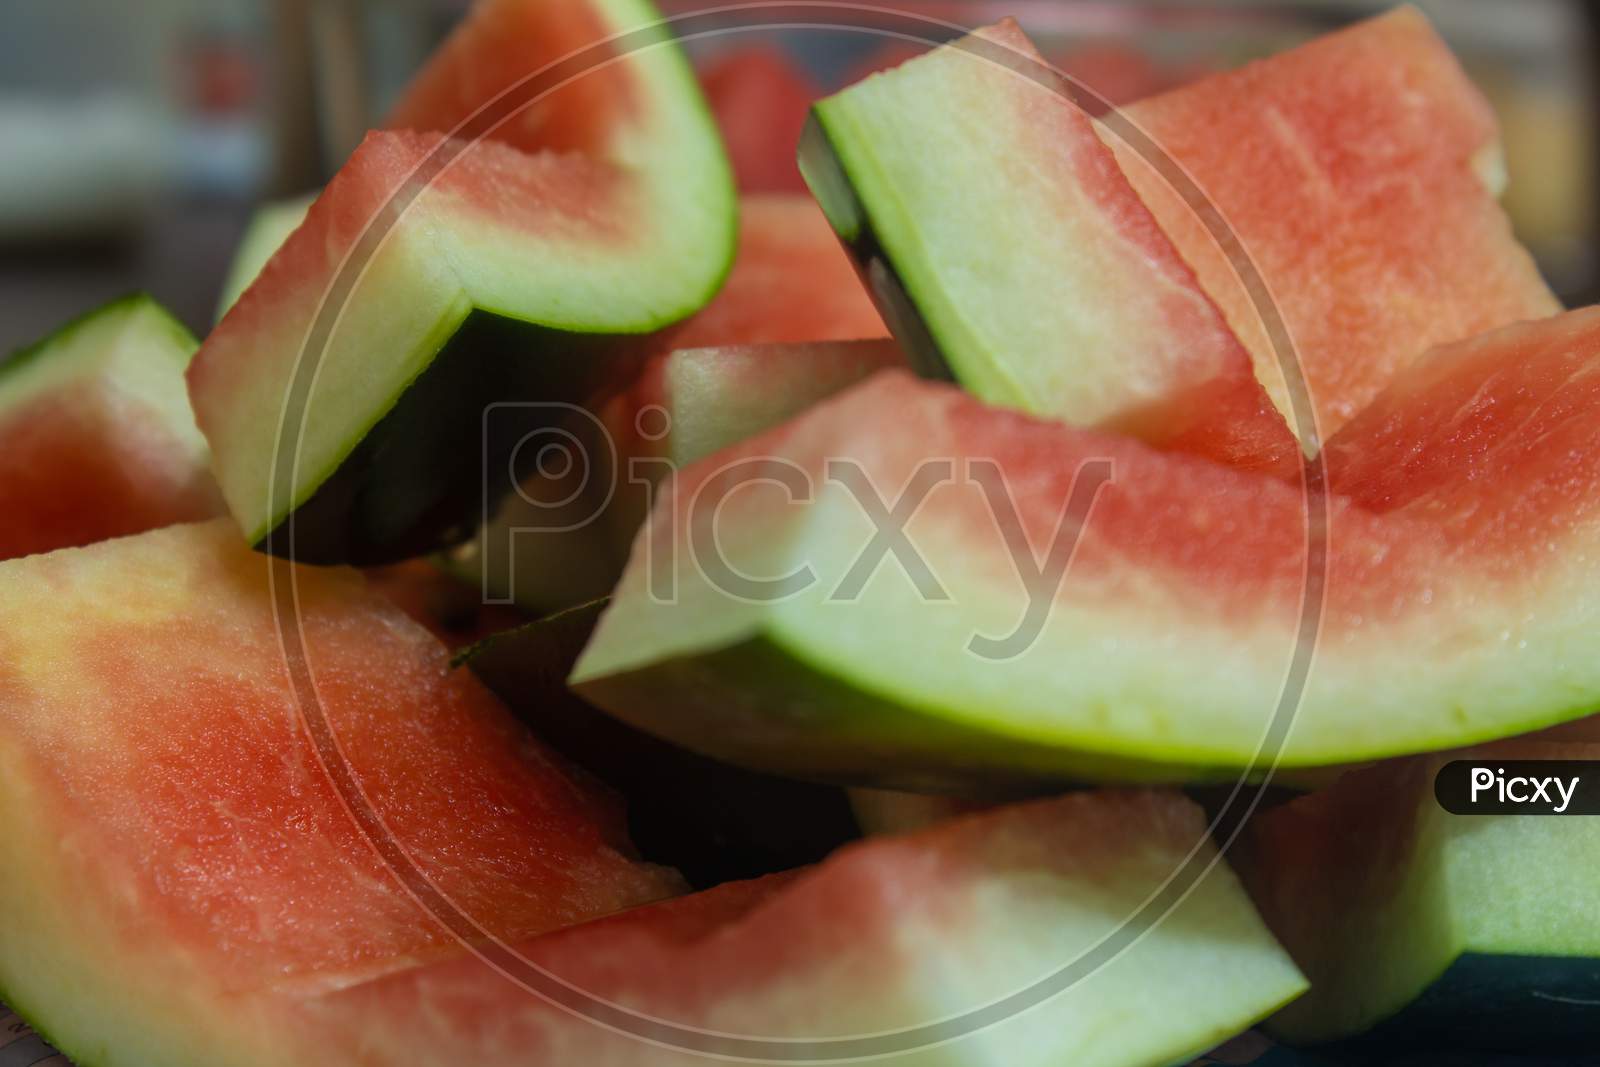 View Of The Cut Watermelon Fruit Thick Skin. Use For Healthy Snack Concept.